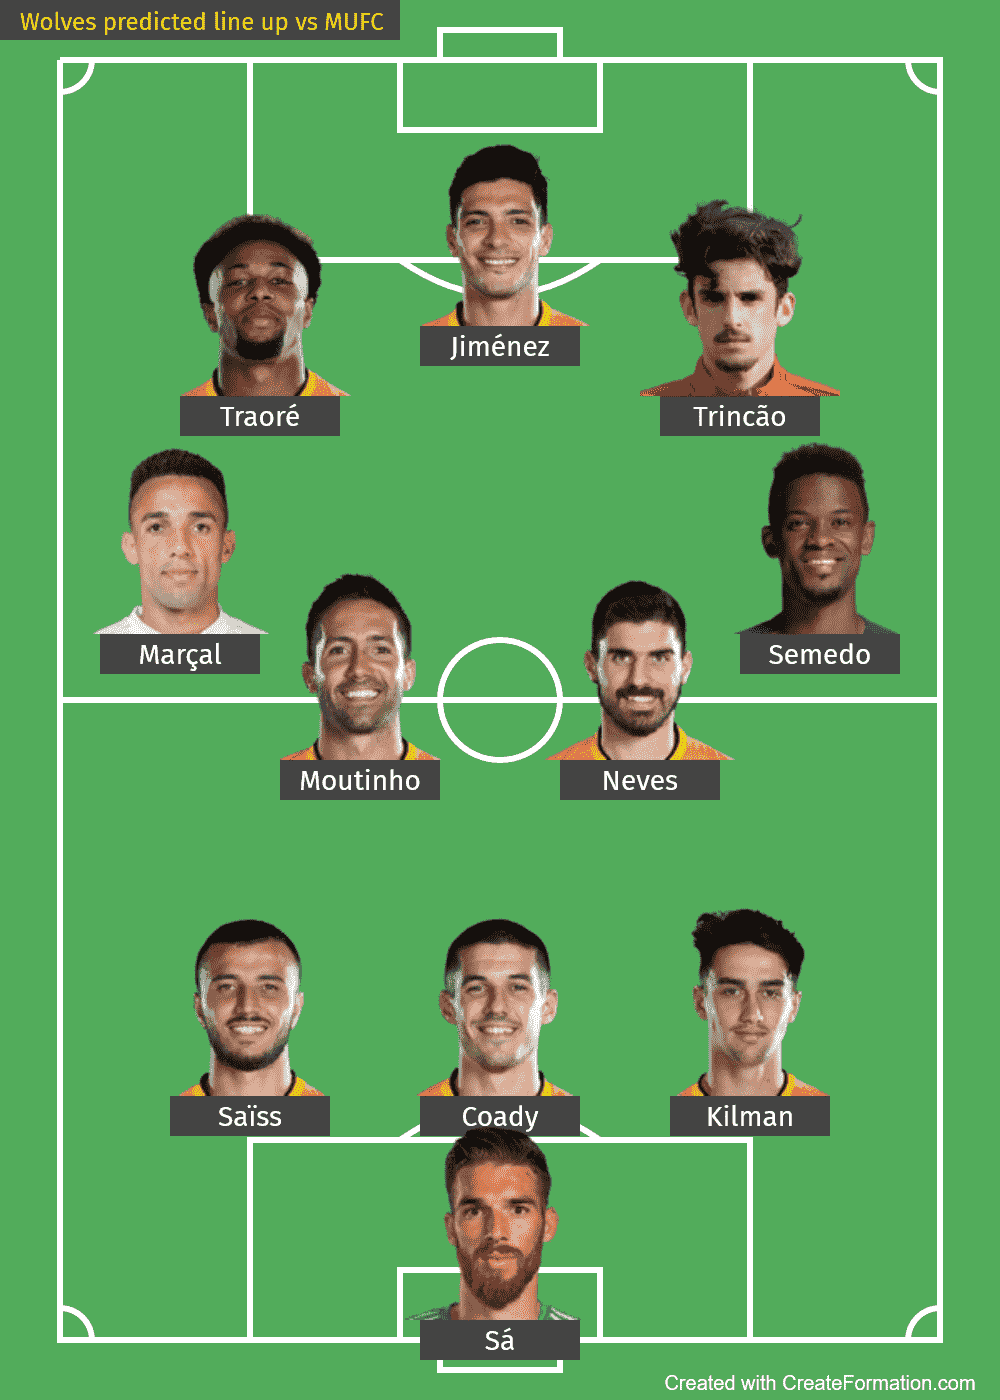 Wolves predicted line up vs MUFC-min